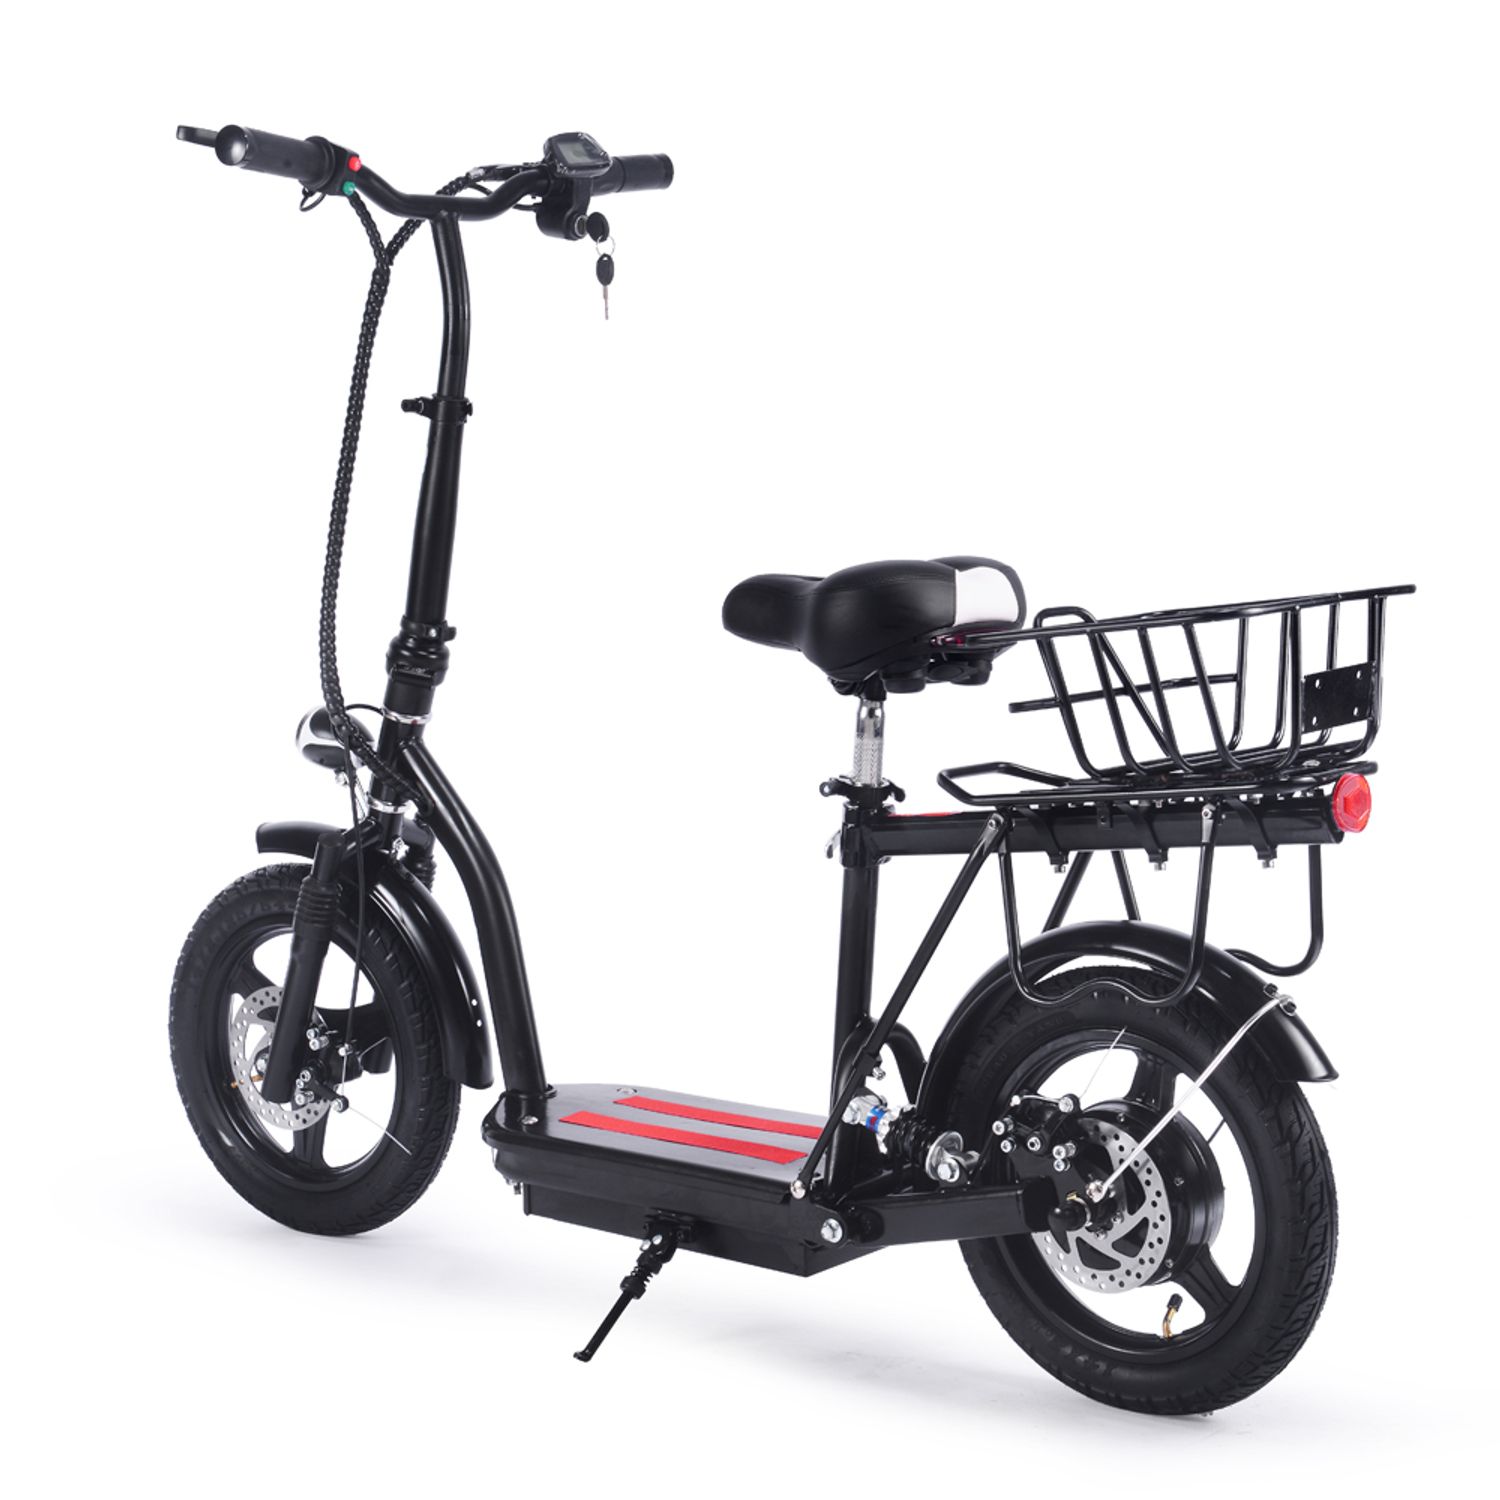 SAY YEAH Cruiser Electric Scooter 350W 48V Top Speed: 18 mph Range: 10-15 miles per charge